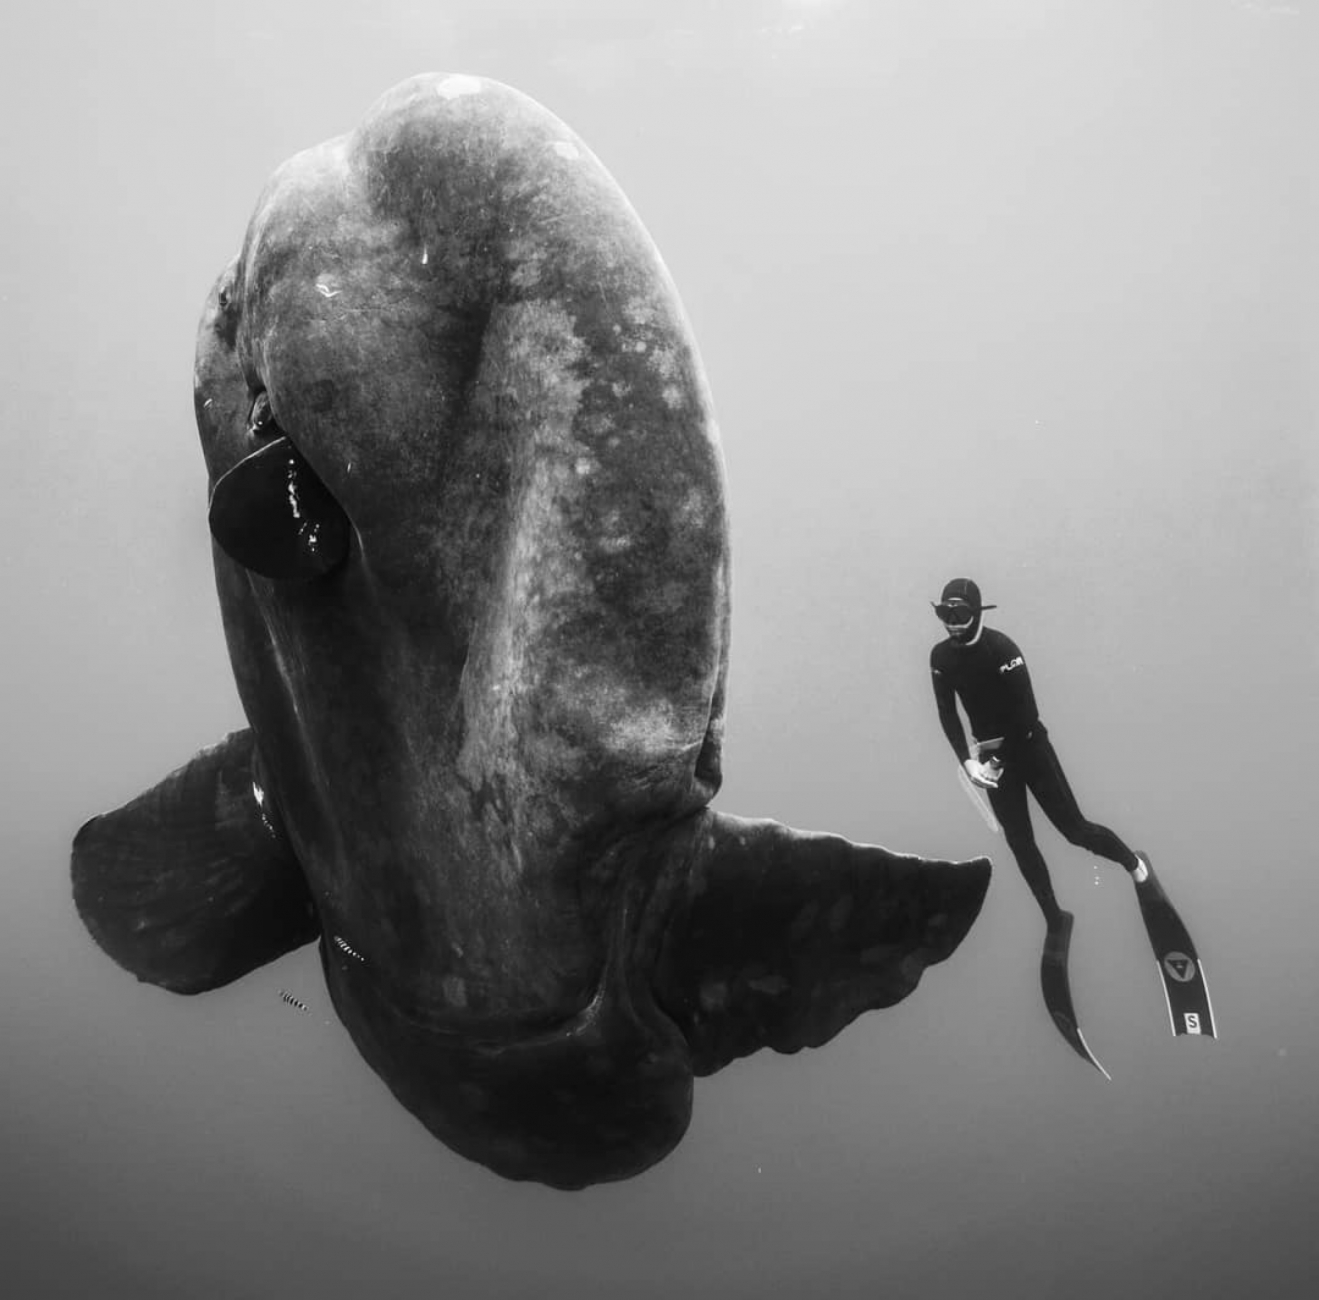 The 7 Best Freediving And Spearfishing Photos For This Week